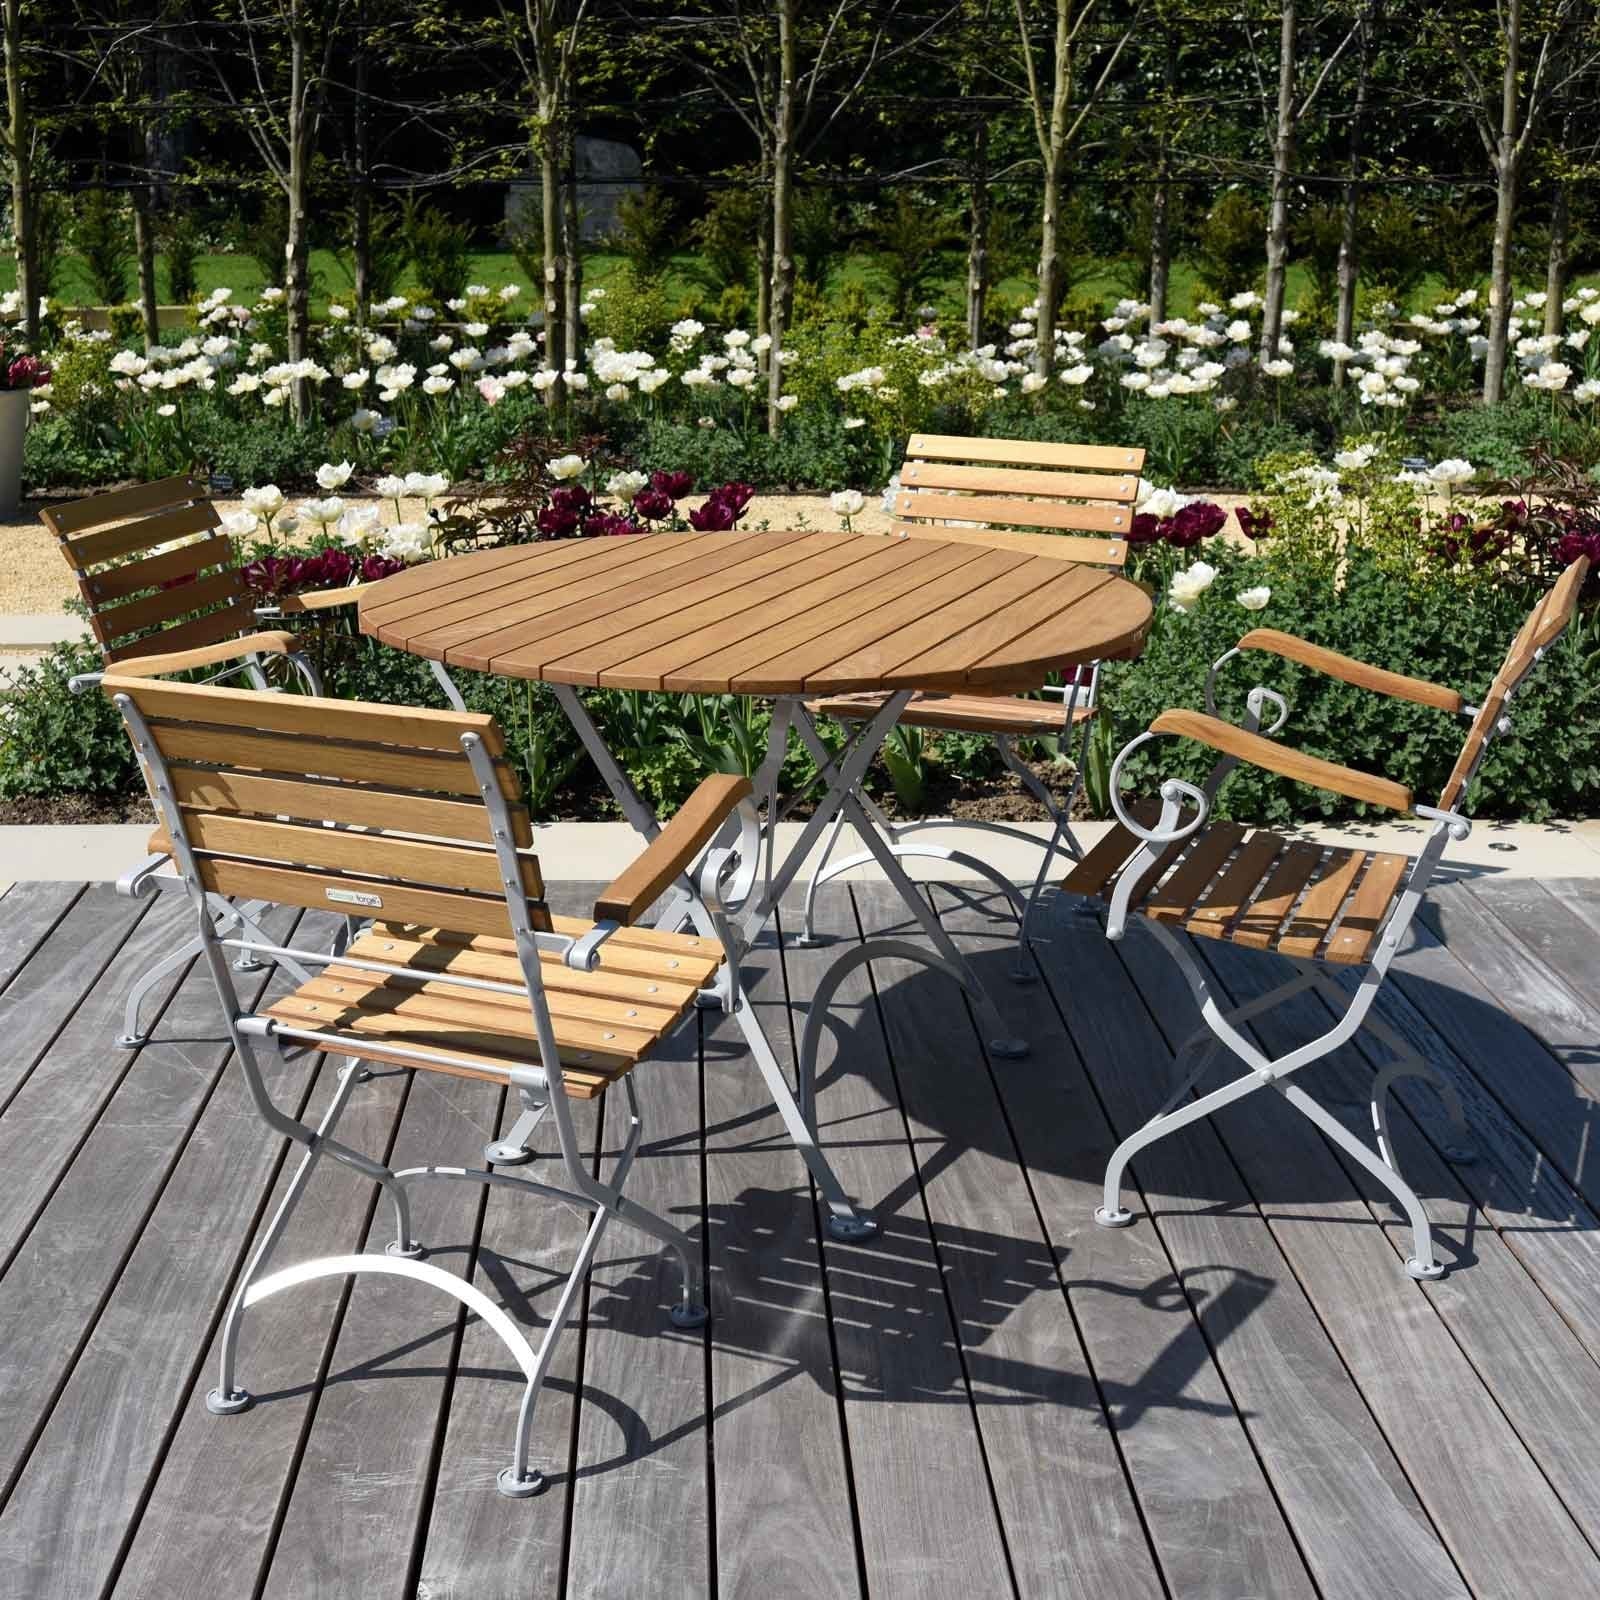 Harrod Garden Dining Table And Chairs, Metal Dining Table And Chairs Outdoor